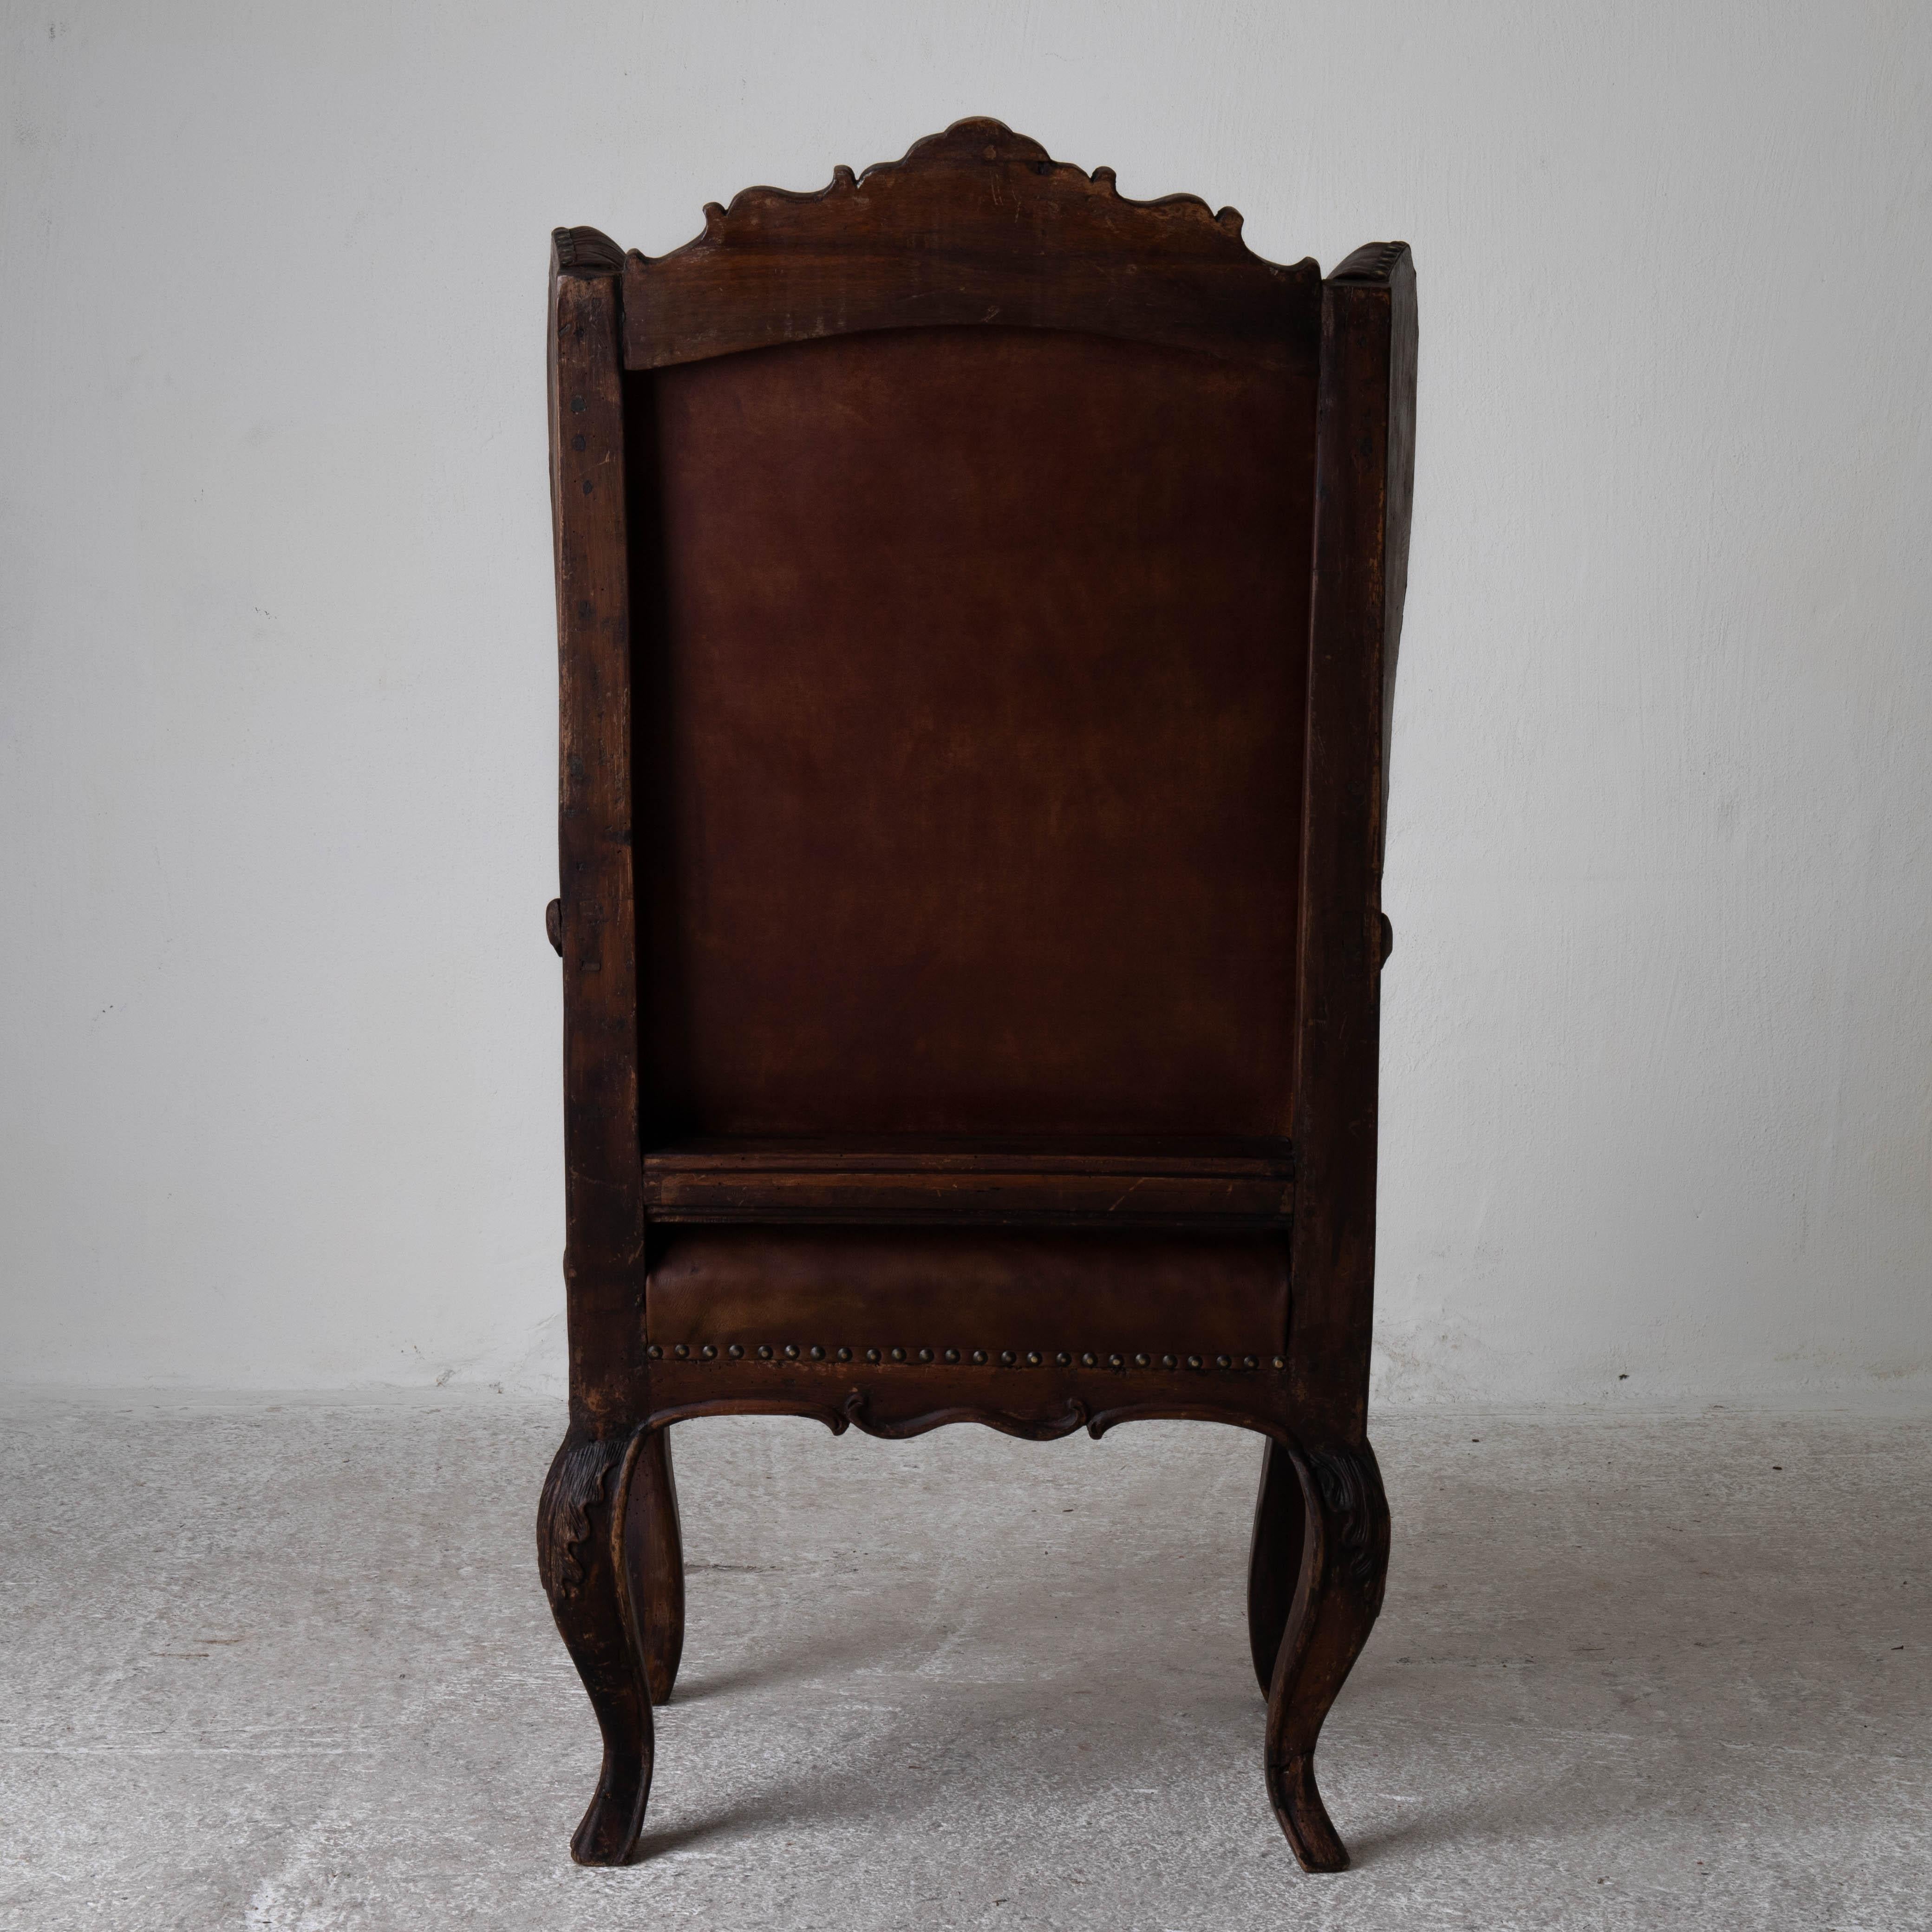 European Chair Wingback Swedish Rococo Period 1750-1775 Brown Leather Sweden For Sale